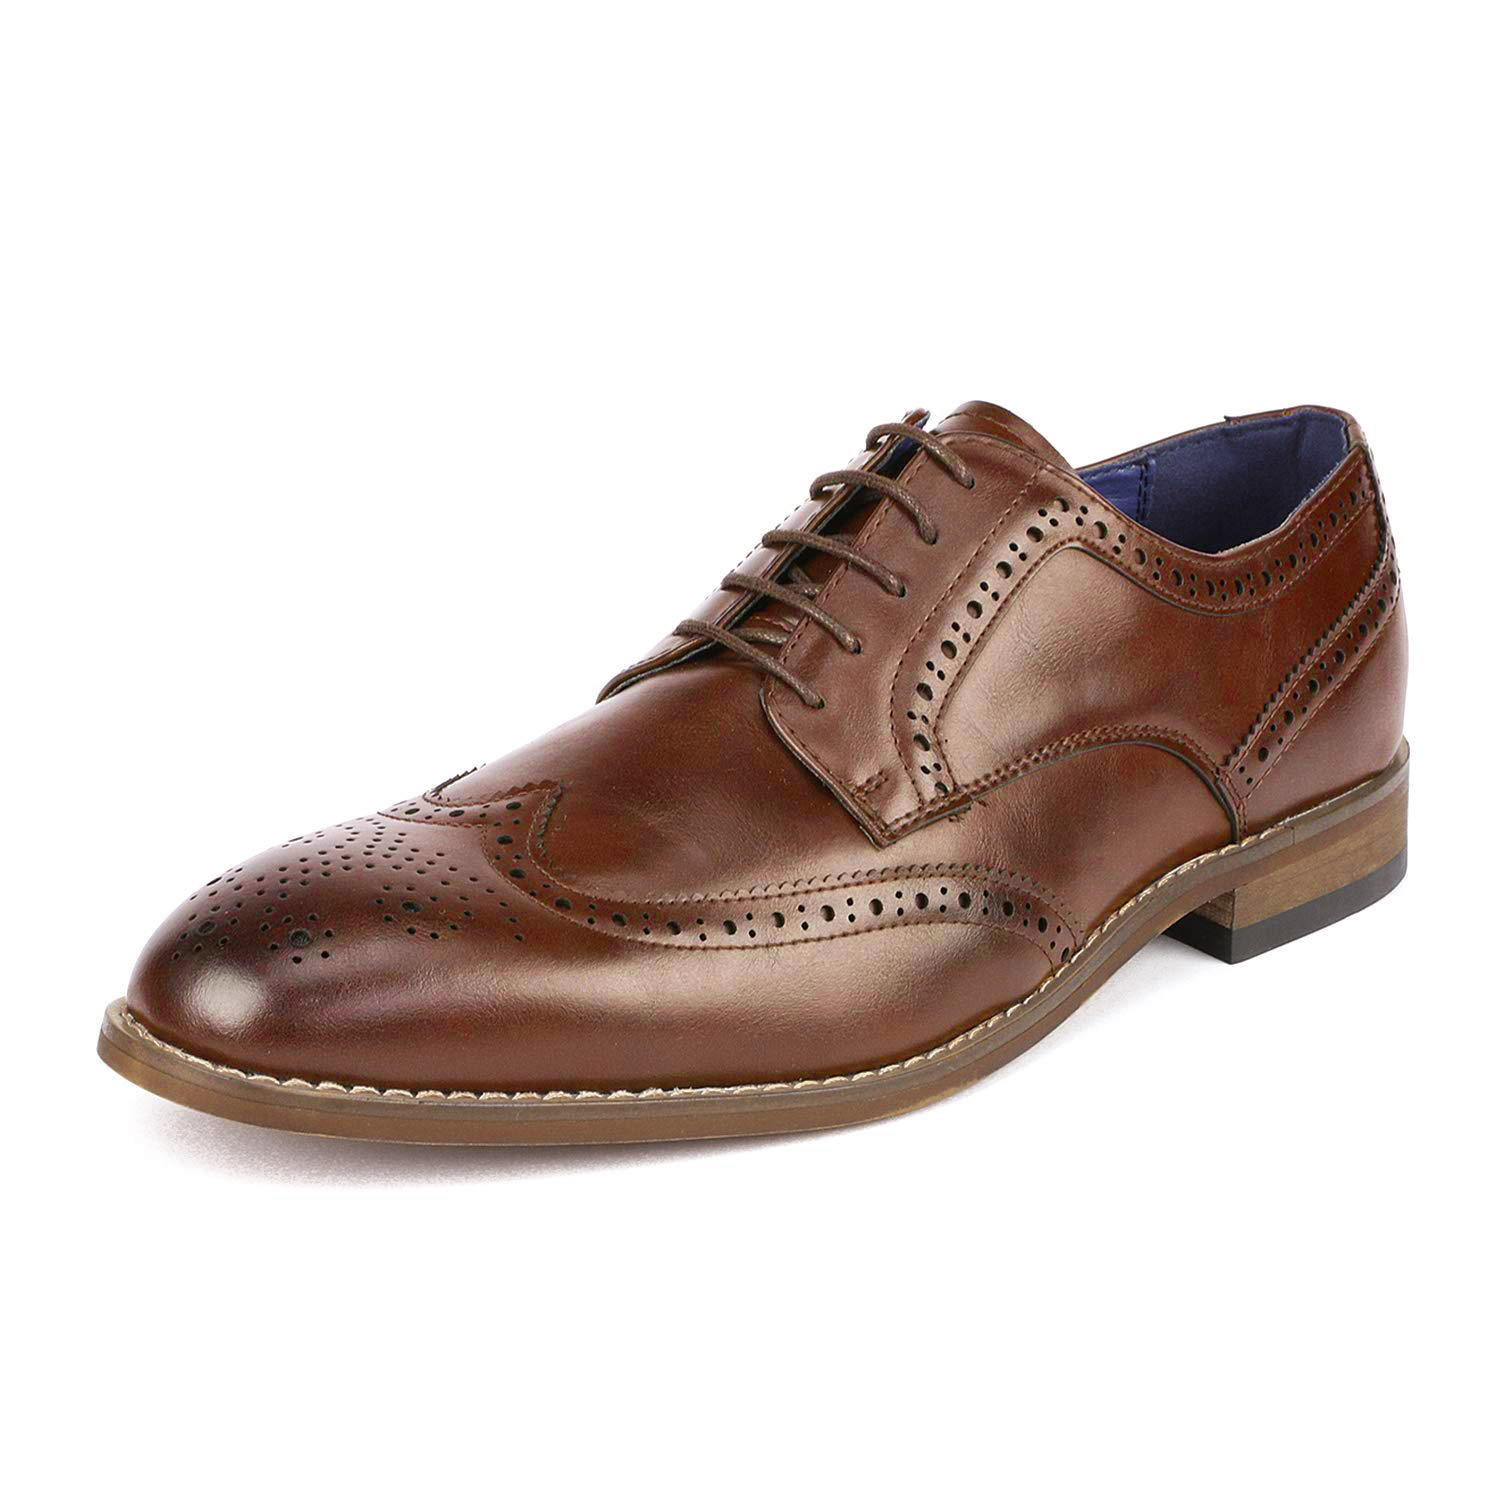 Bruno Marc Mens Brogue Oxford Shoes Lace up Wing Tip Dress Shoes Casual Shoes WILLIAM_2 BROWN Size 10.5 - image 1 of 5